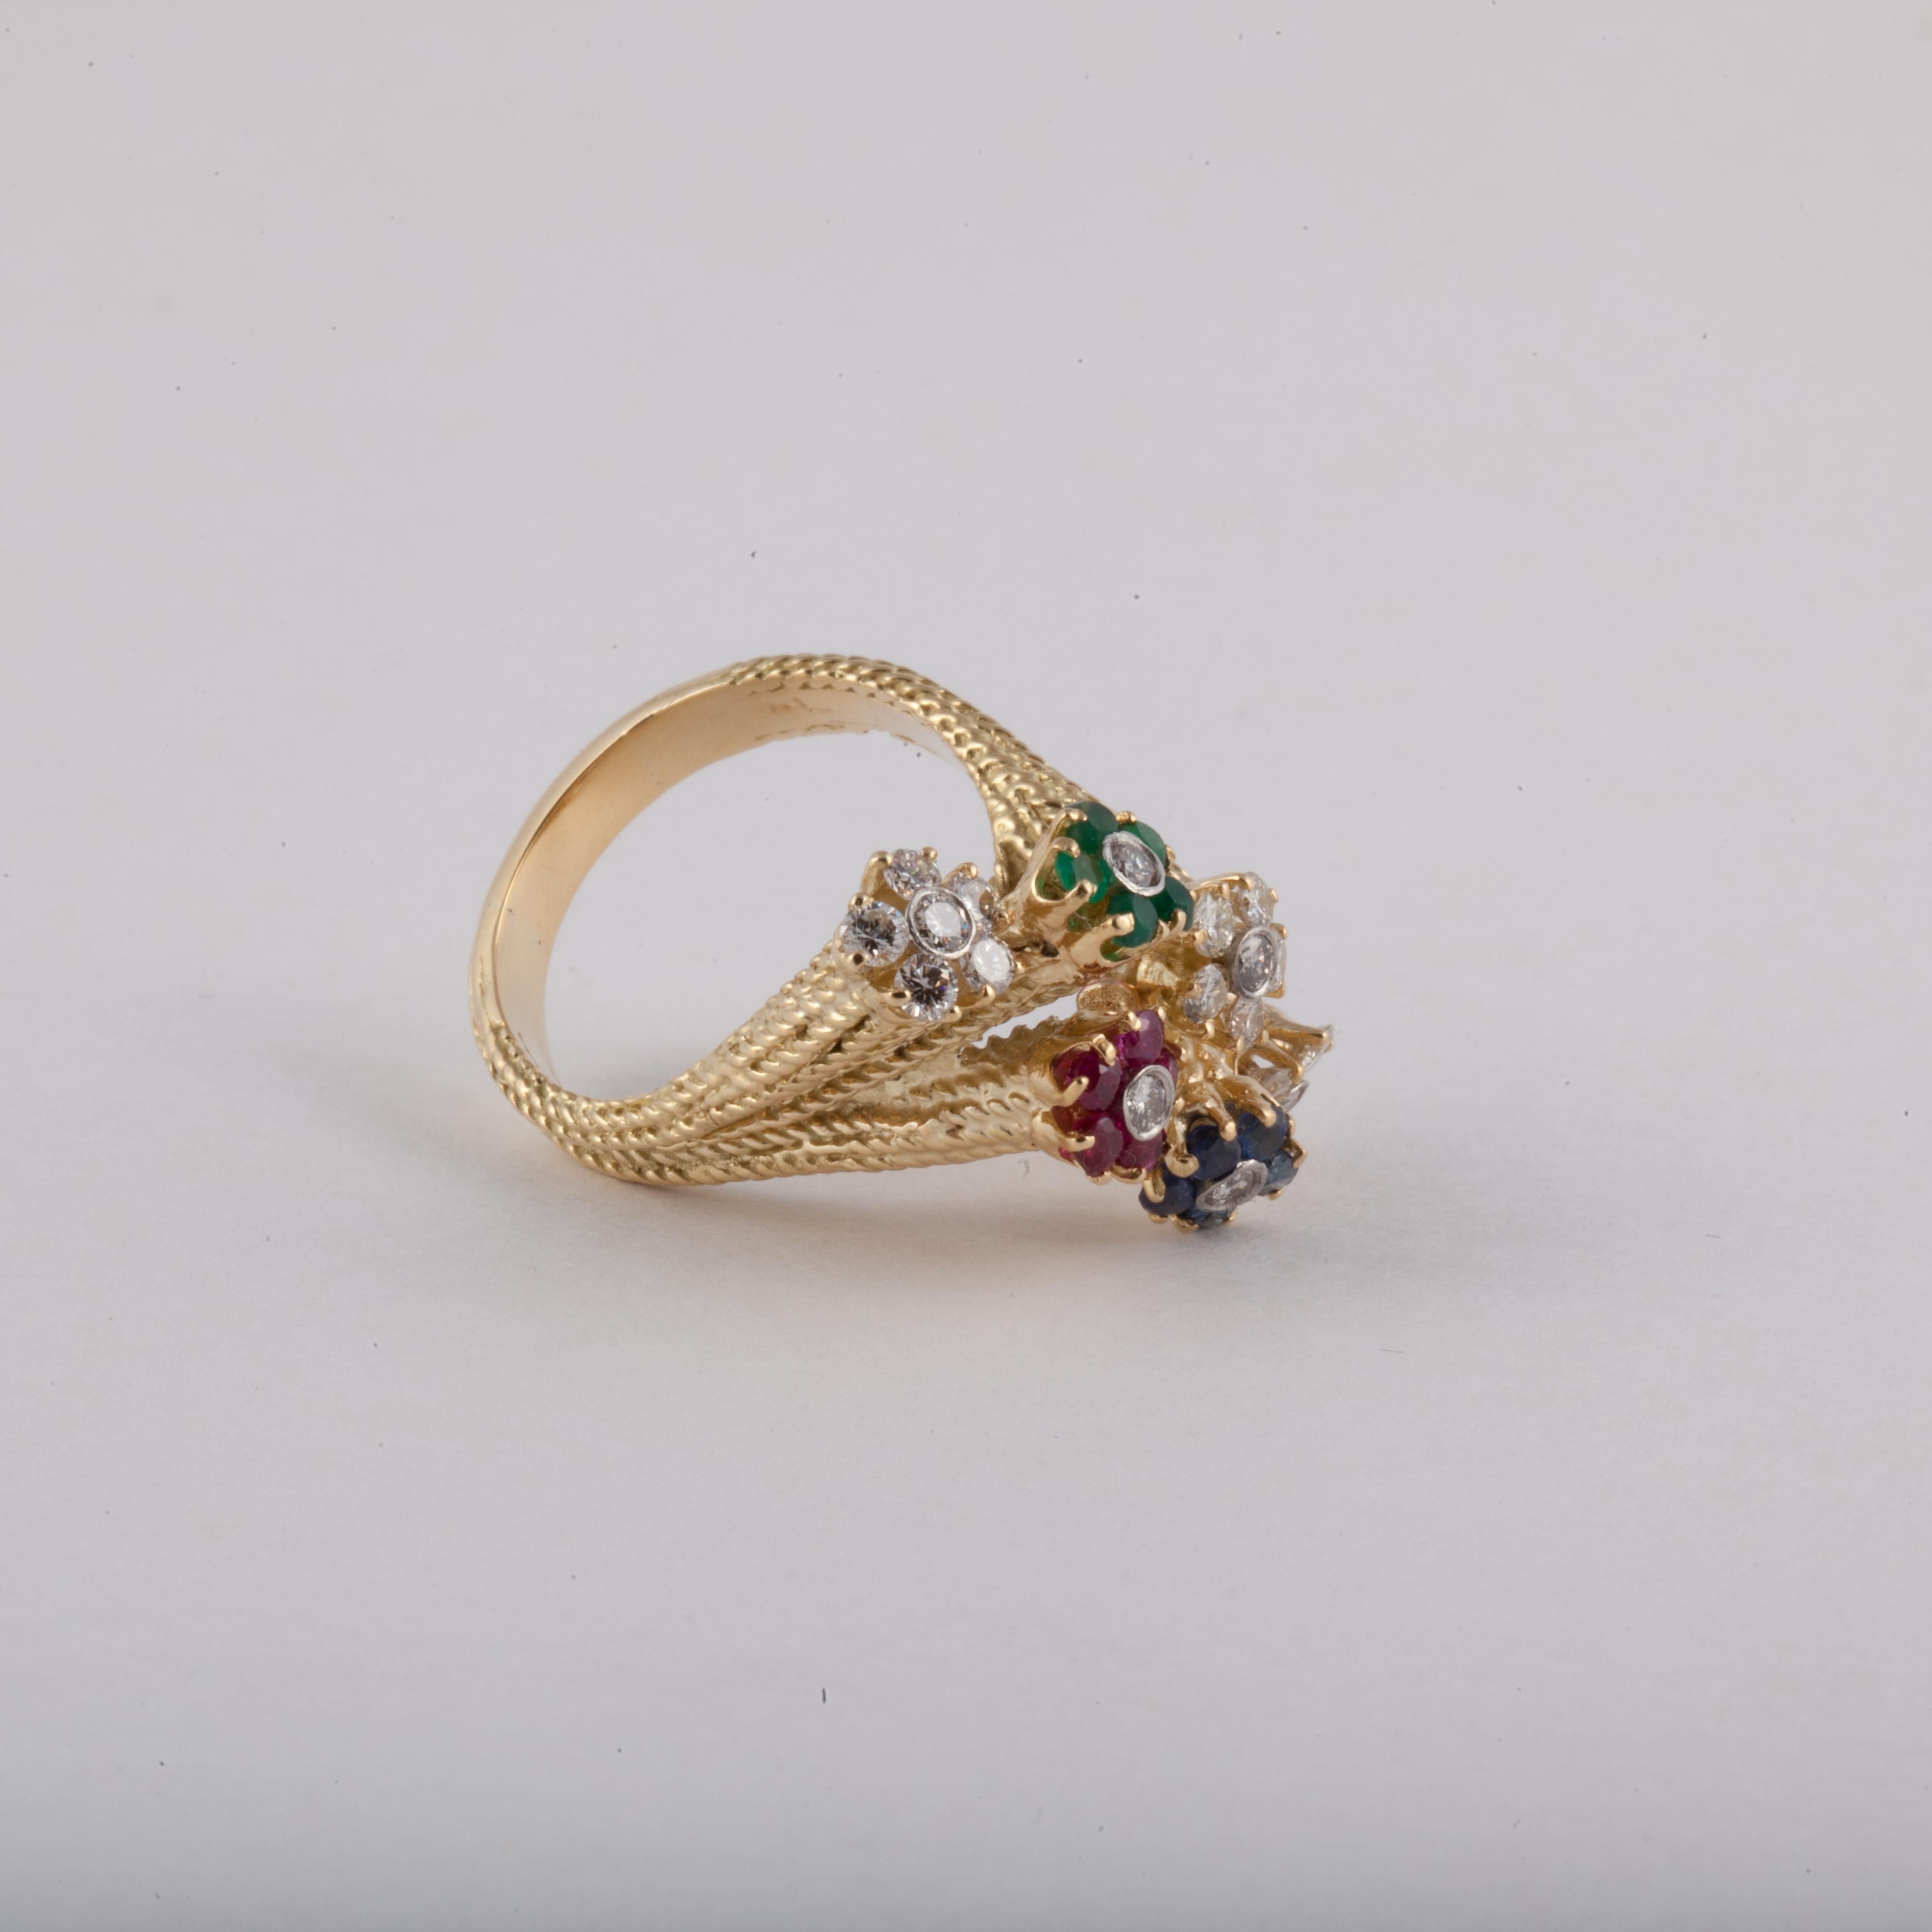 18K yellow gold ring featuring small flowers crafted in different gemstones, including diamonds, sapphires, rubies and emeralds.  The stems are textured.  Measures 1 1/4 inches long, 1/2 inch wide and stands 5/8 inches off the finger.  Circa 1970s.